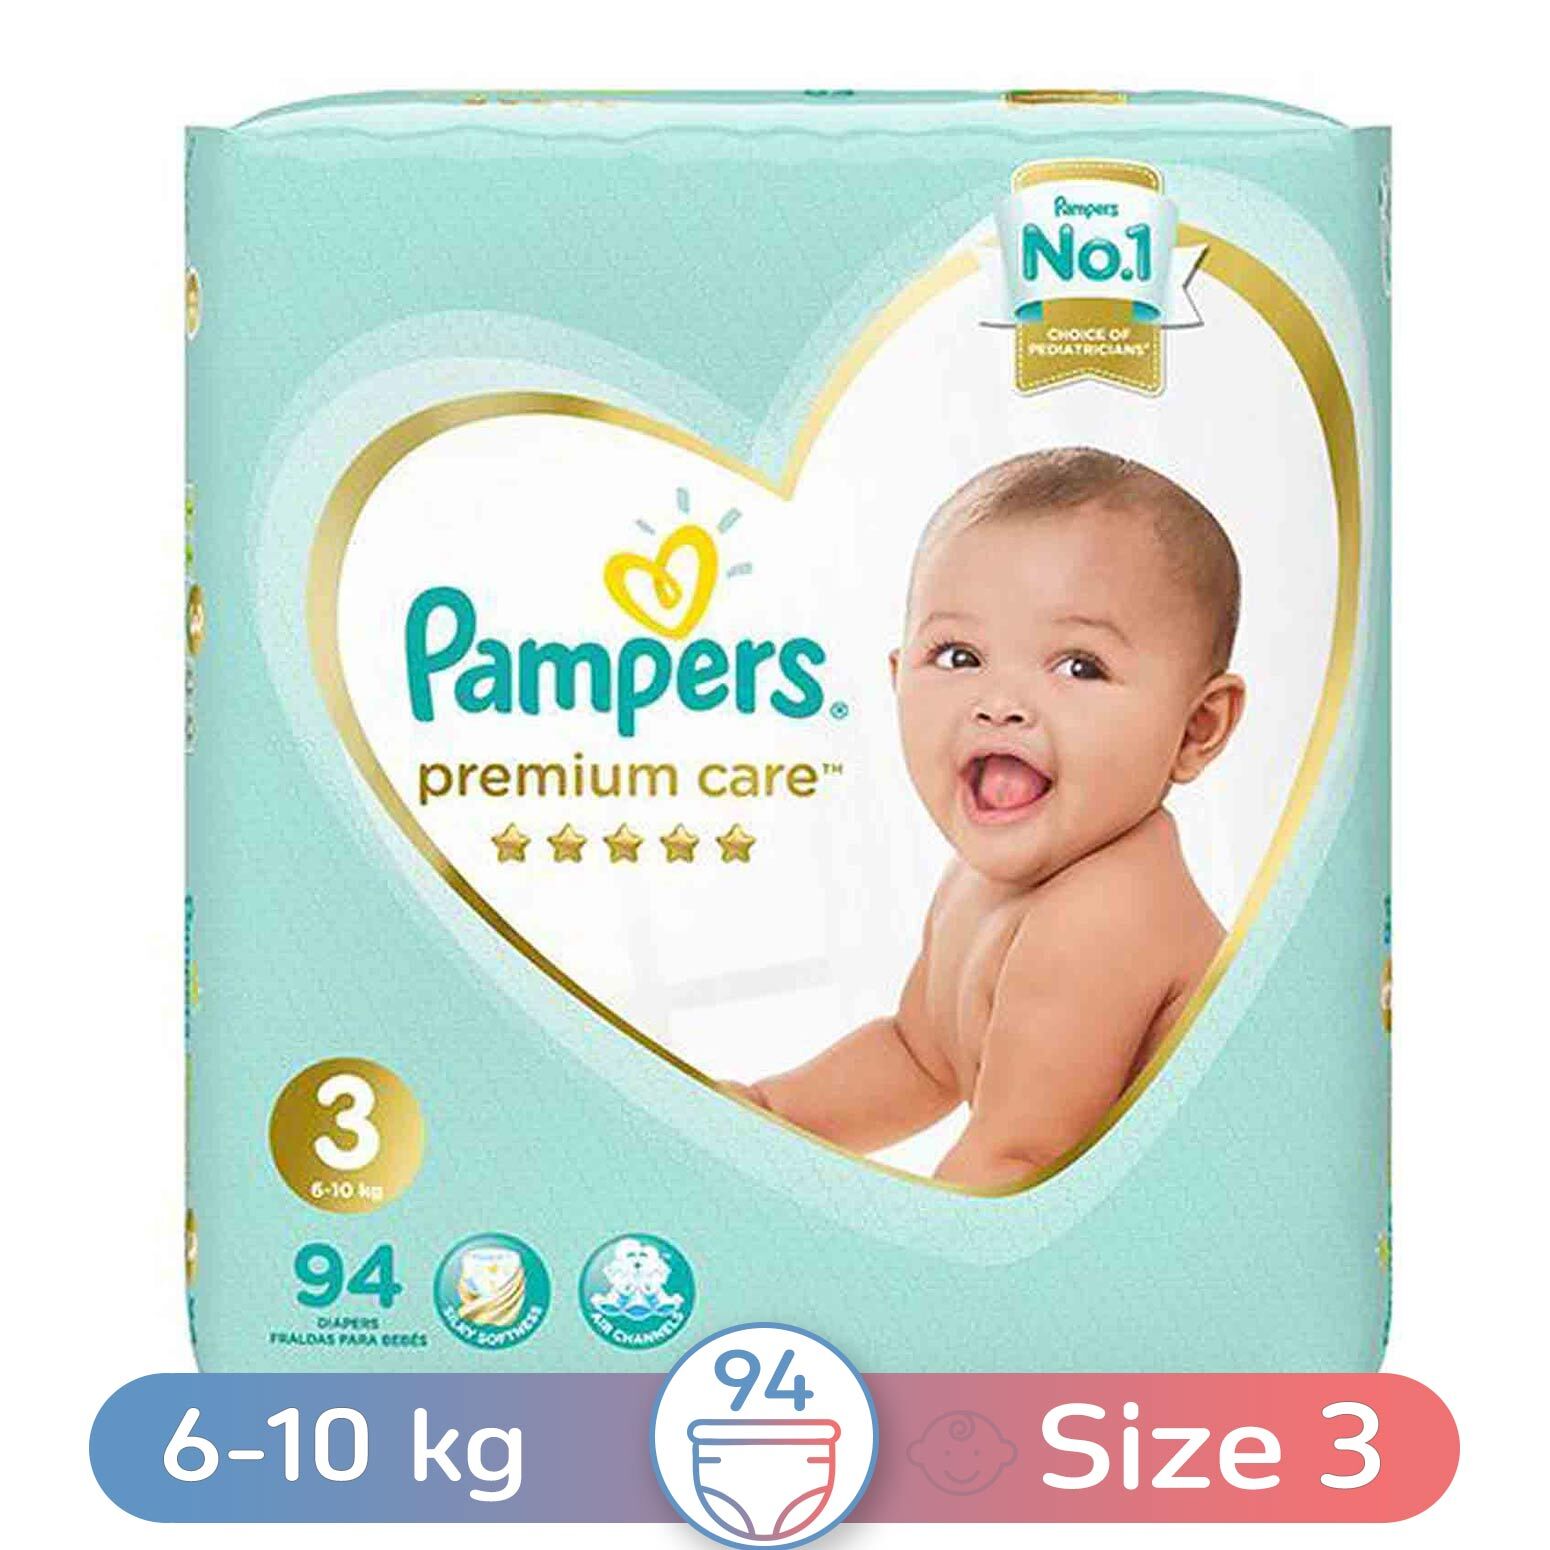 Buy Pampers Premium Care Diapers 3 Midi 6 10 Kg 94 Diapers Online Shop Baby Products On Carrefour Egypt